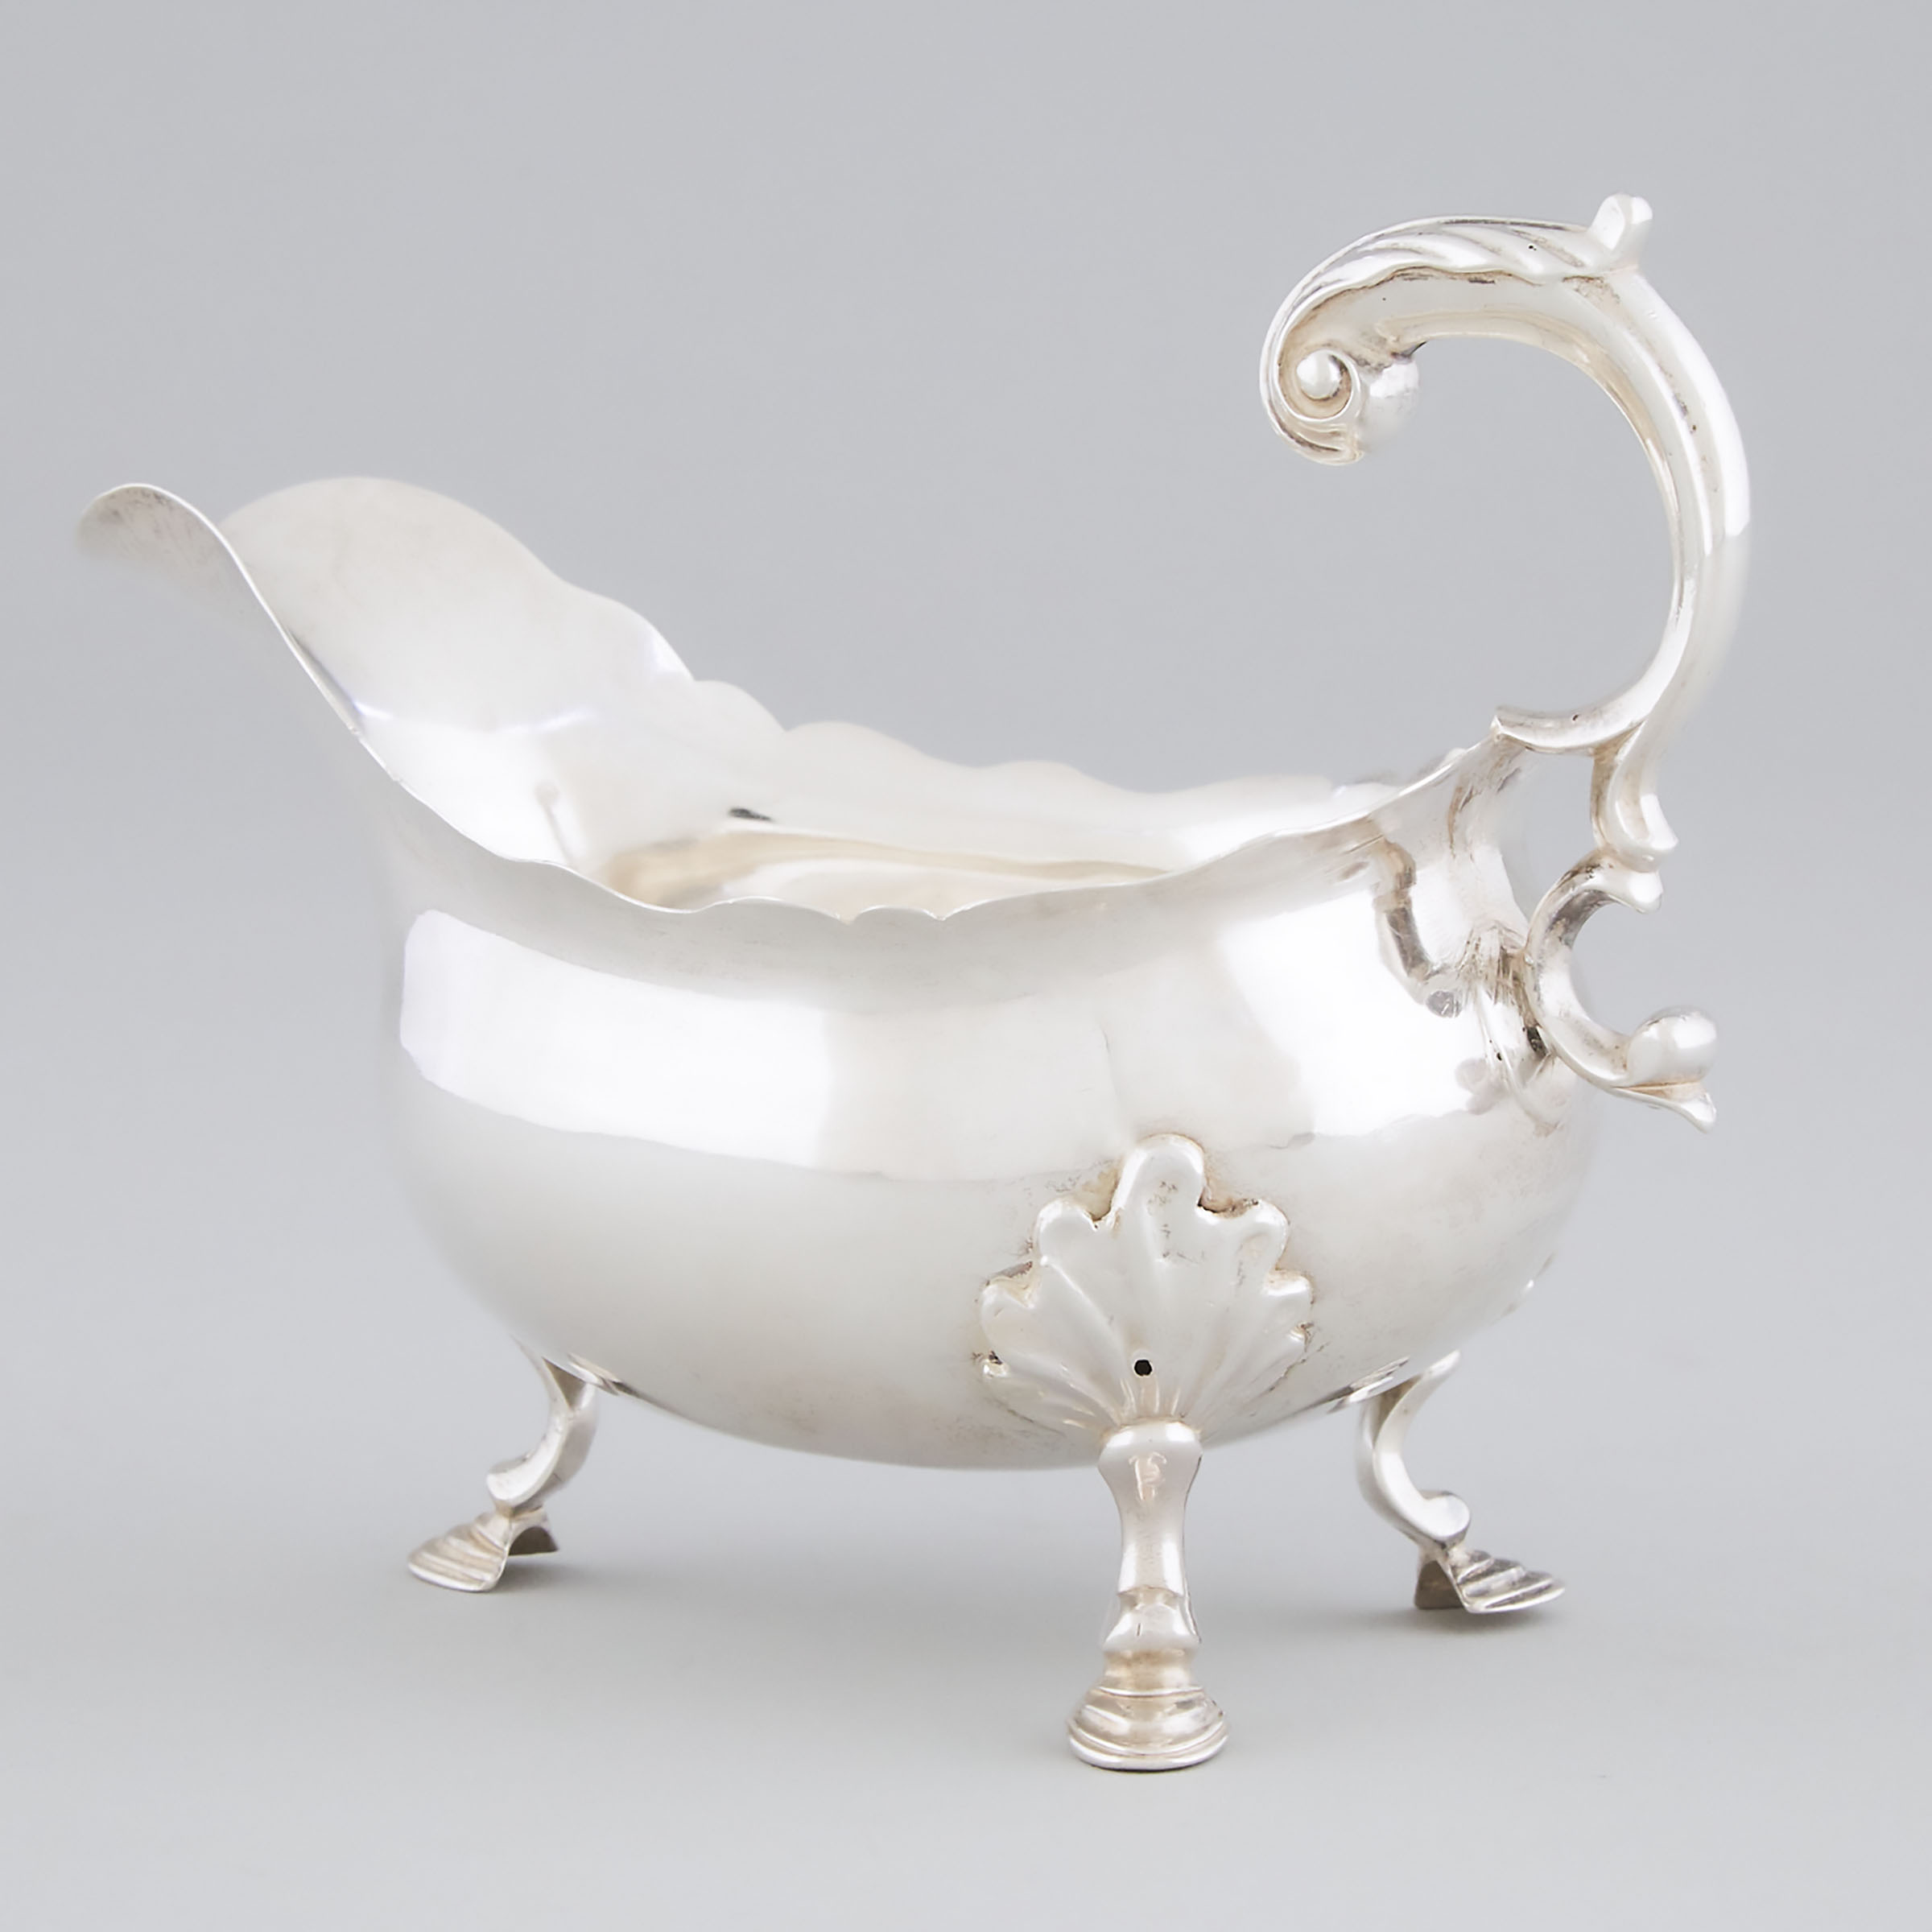 Georgian Silver Oval Bellied Sauce Boat, possibly Walter Brind, London, late 18th century